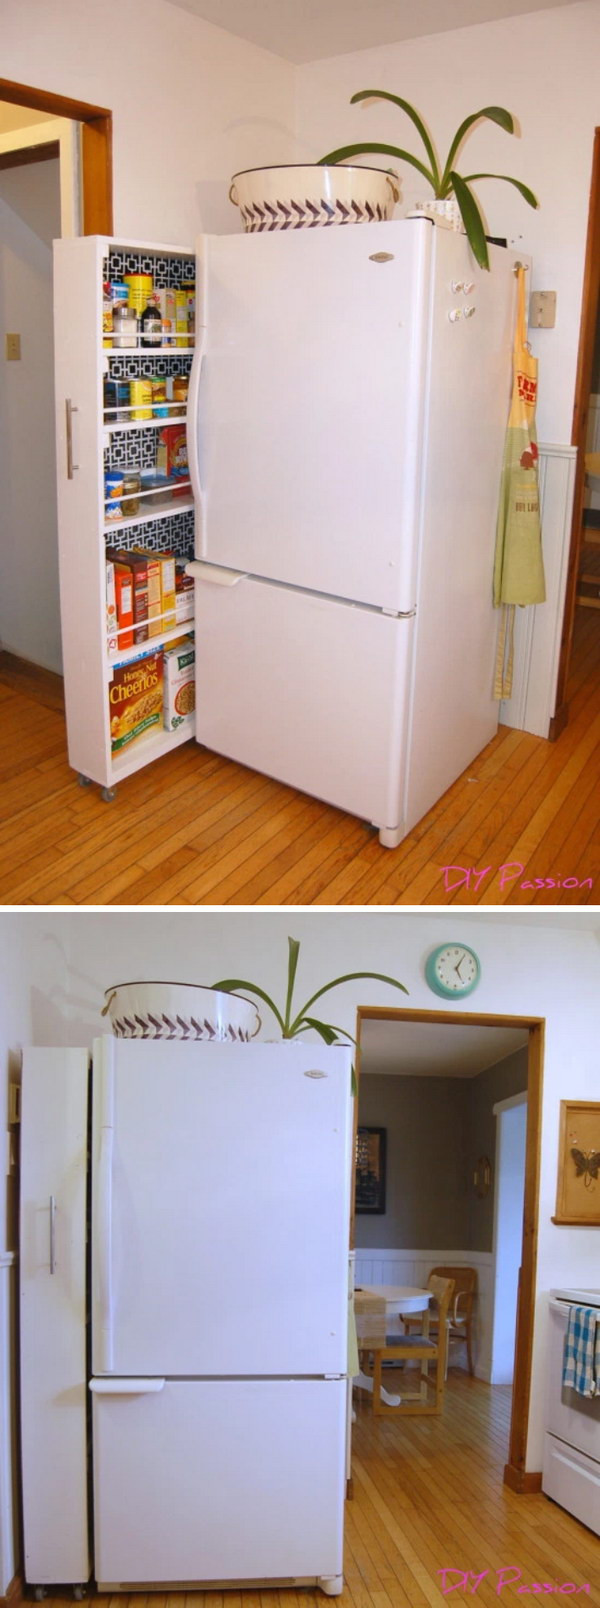 Kitchen Storage For Small Spaces
 50 Easy Storage Ideas for Small Spaces